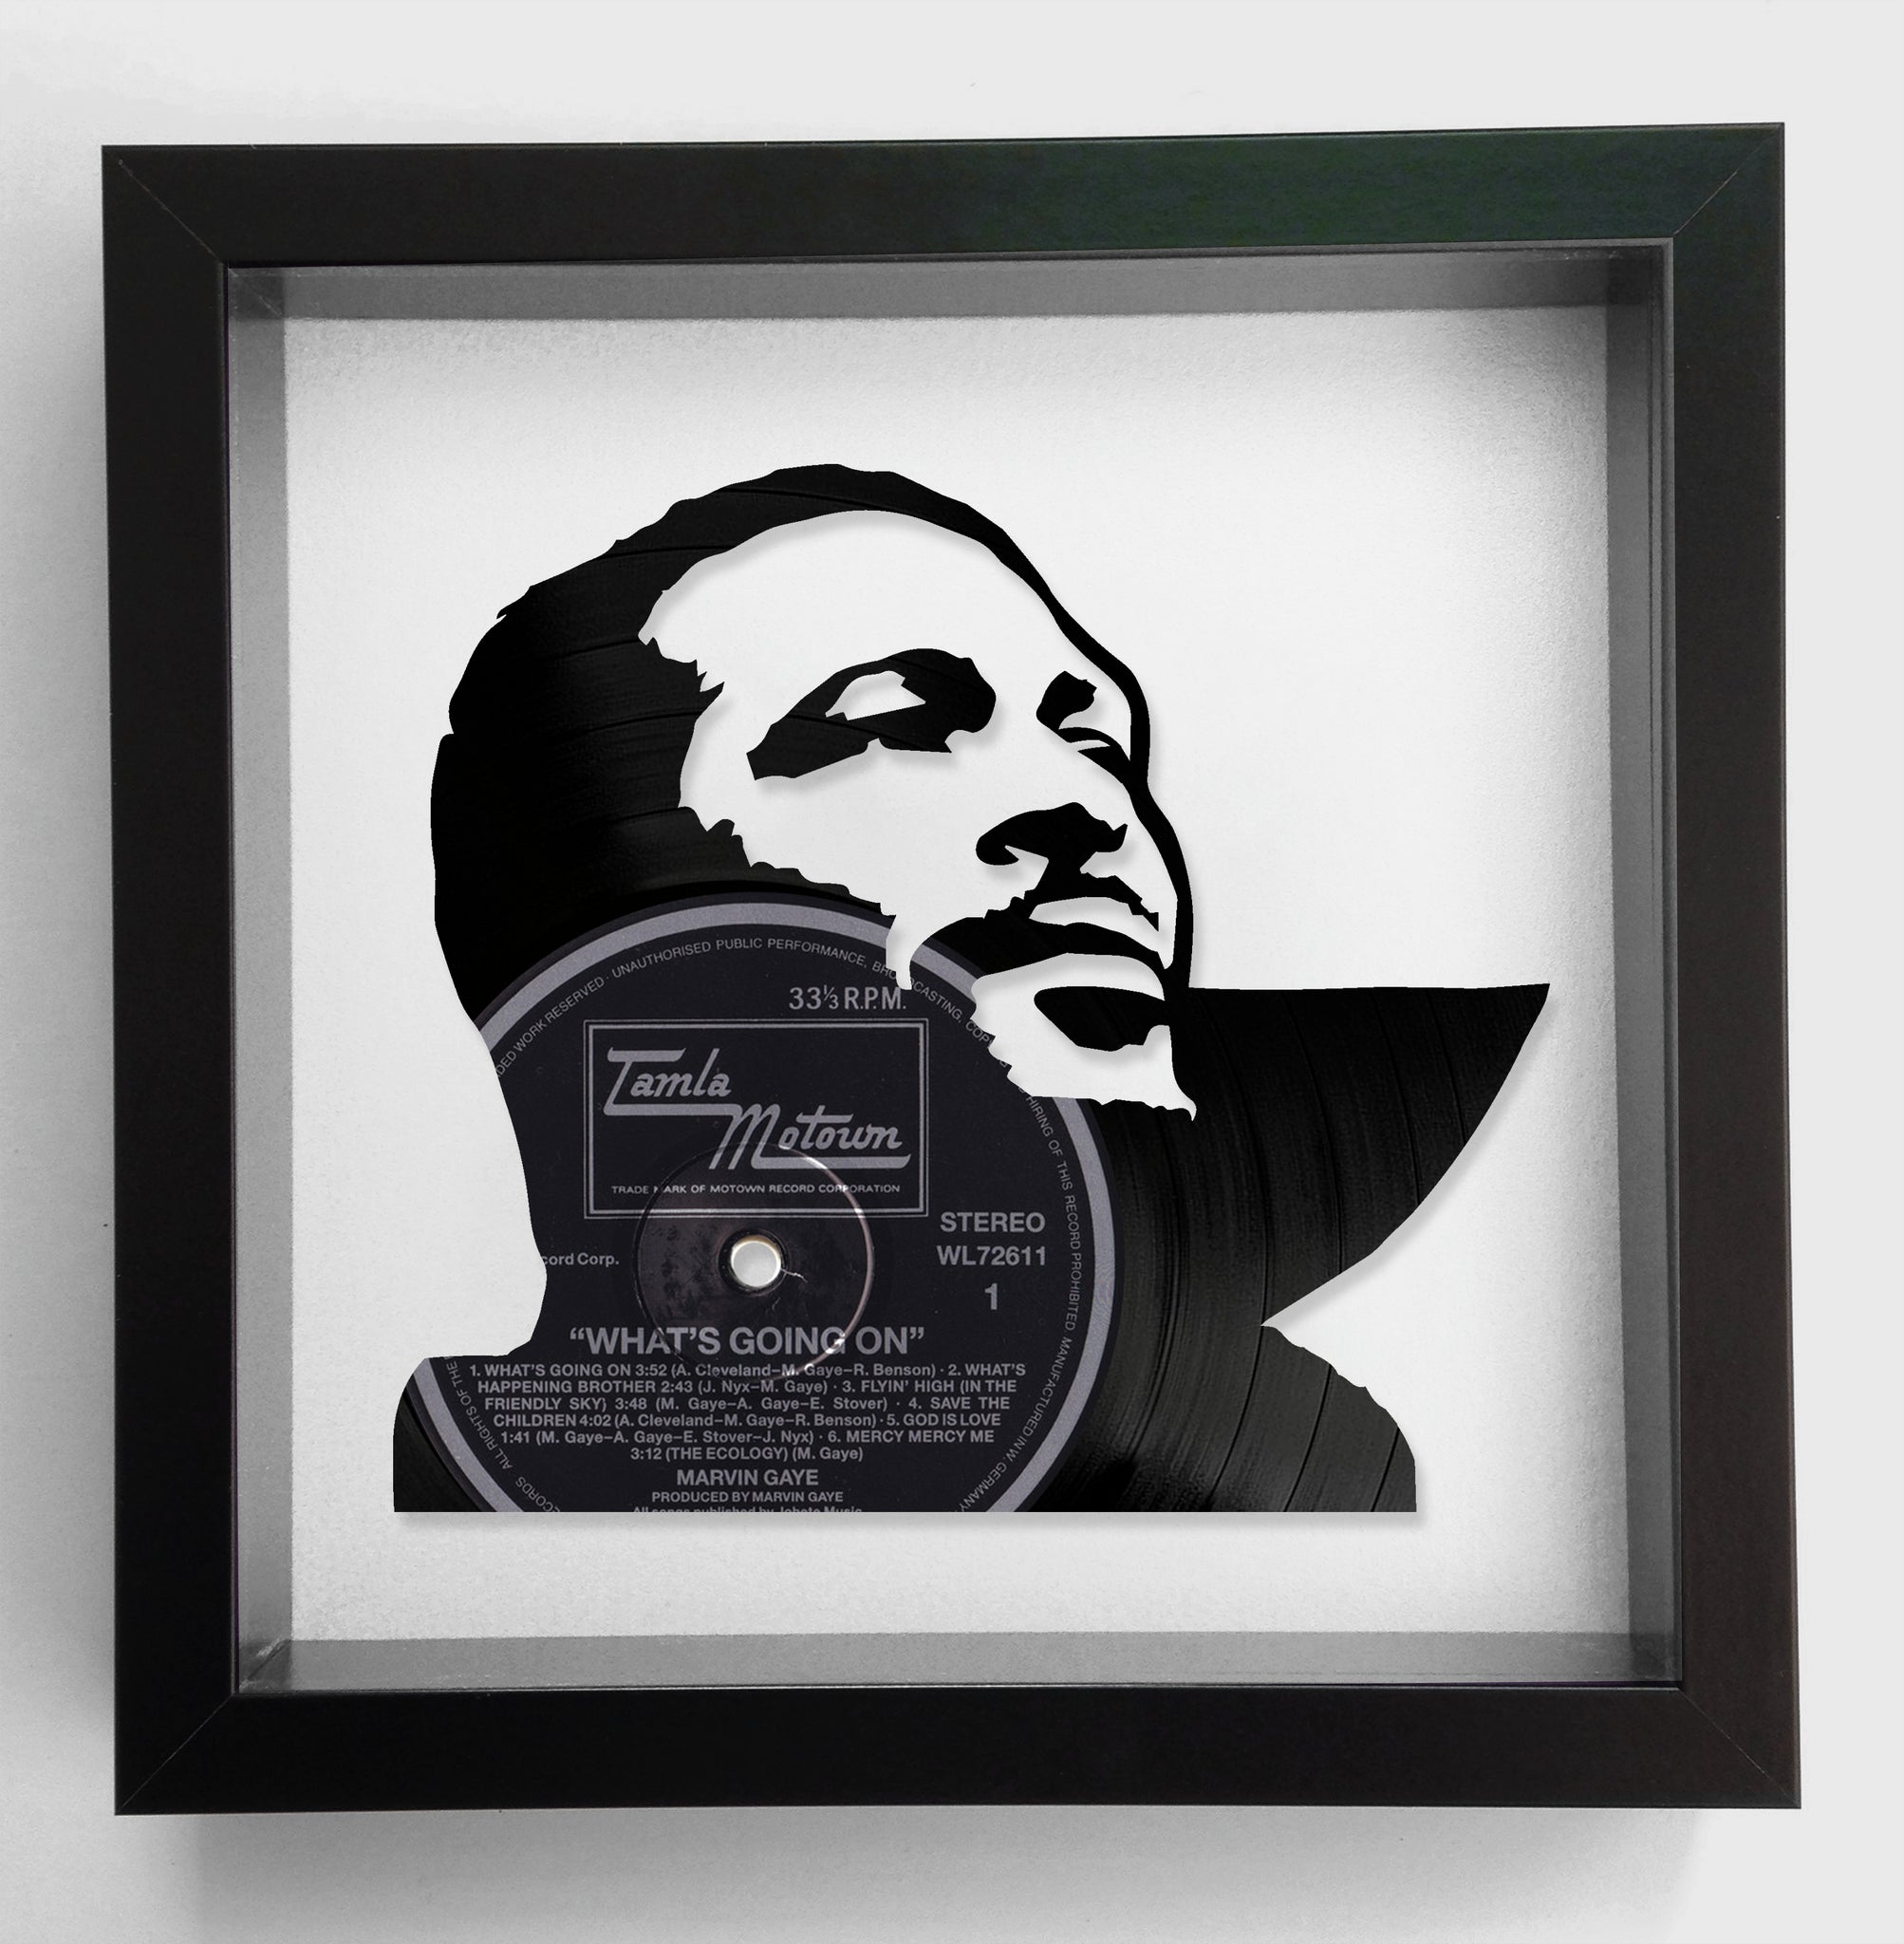 Marvin Gaye - Moods Of Marvin Gaye LP – Motown Records